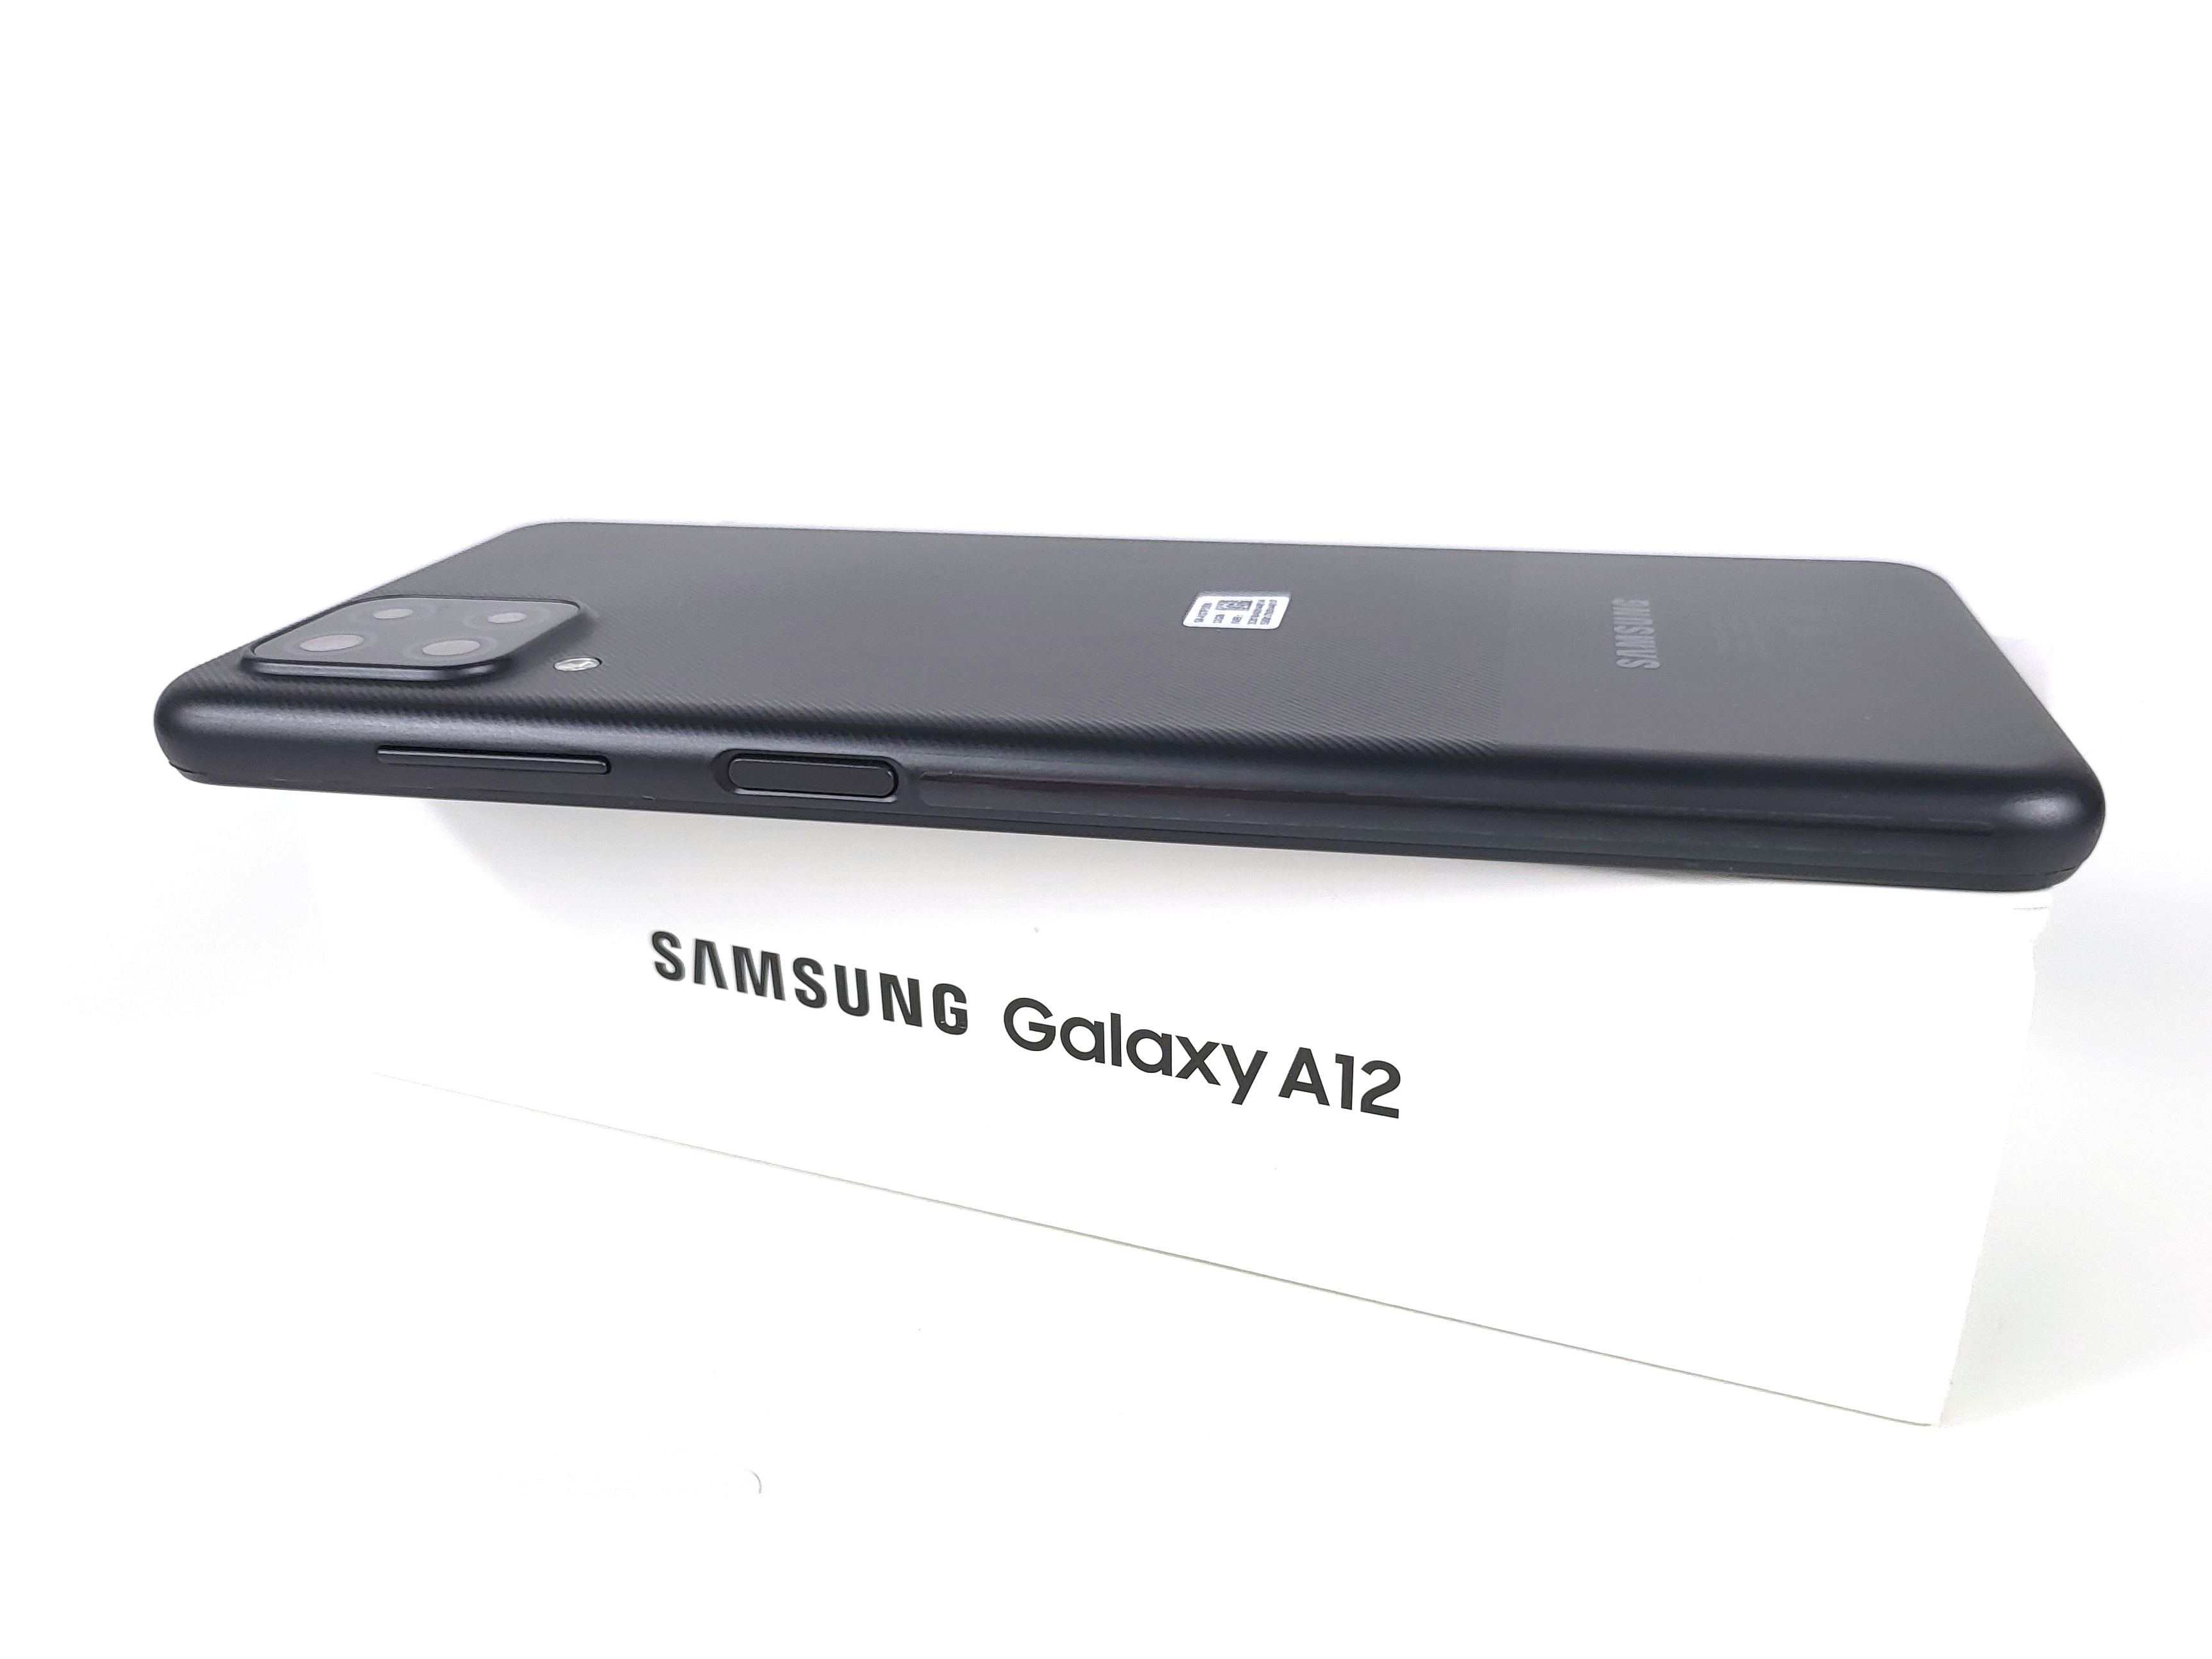 Samsung Galaxy A12: A great budget phone to unleash your awesome